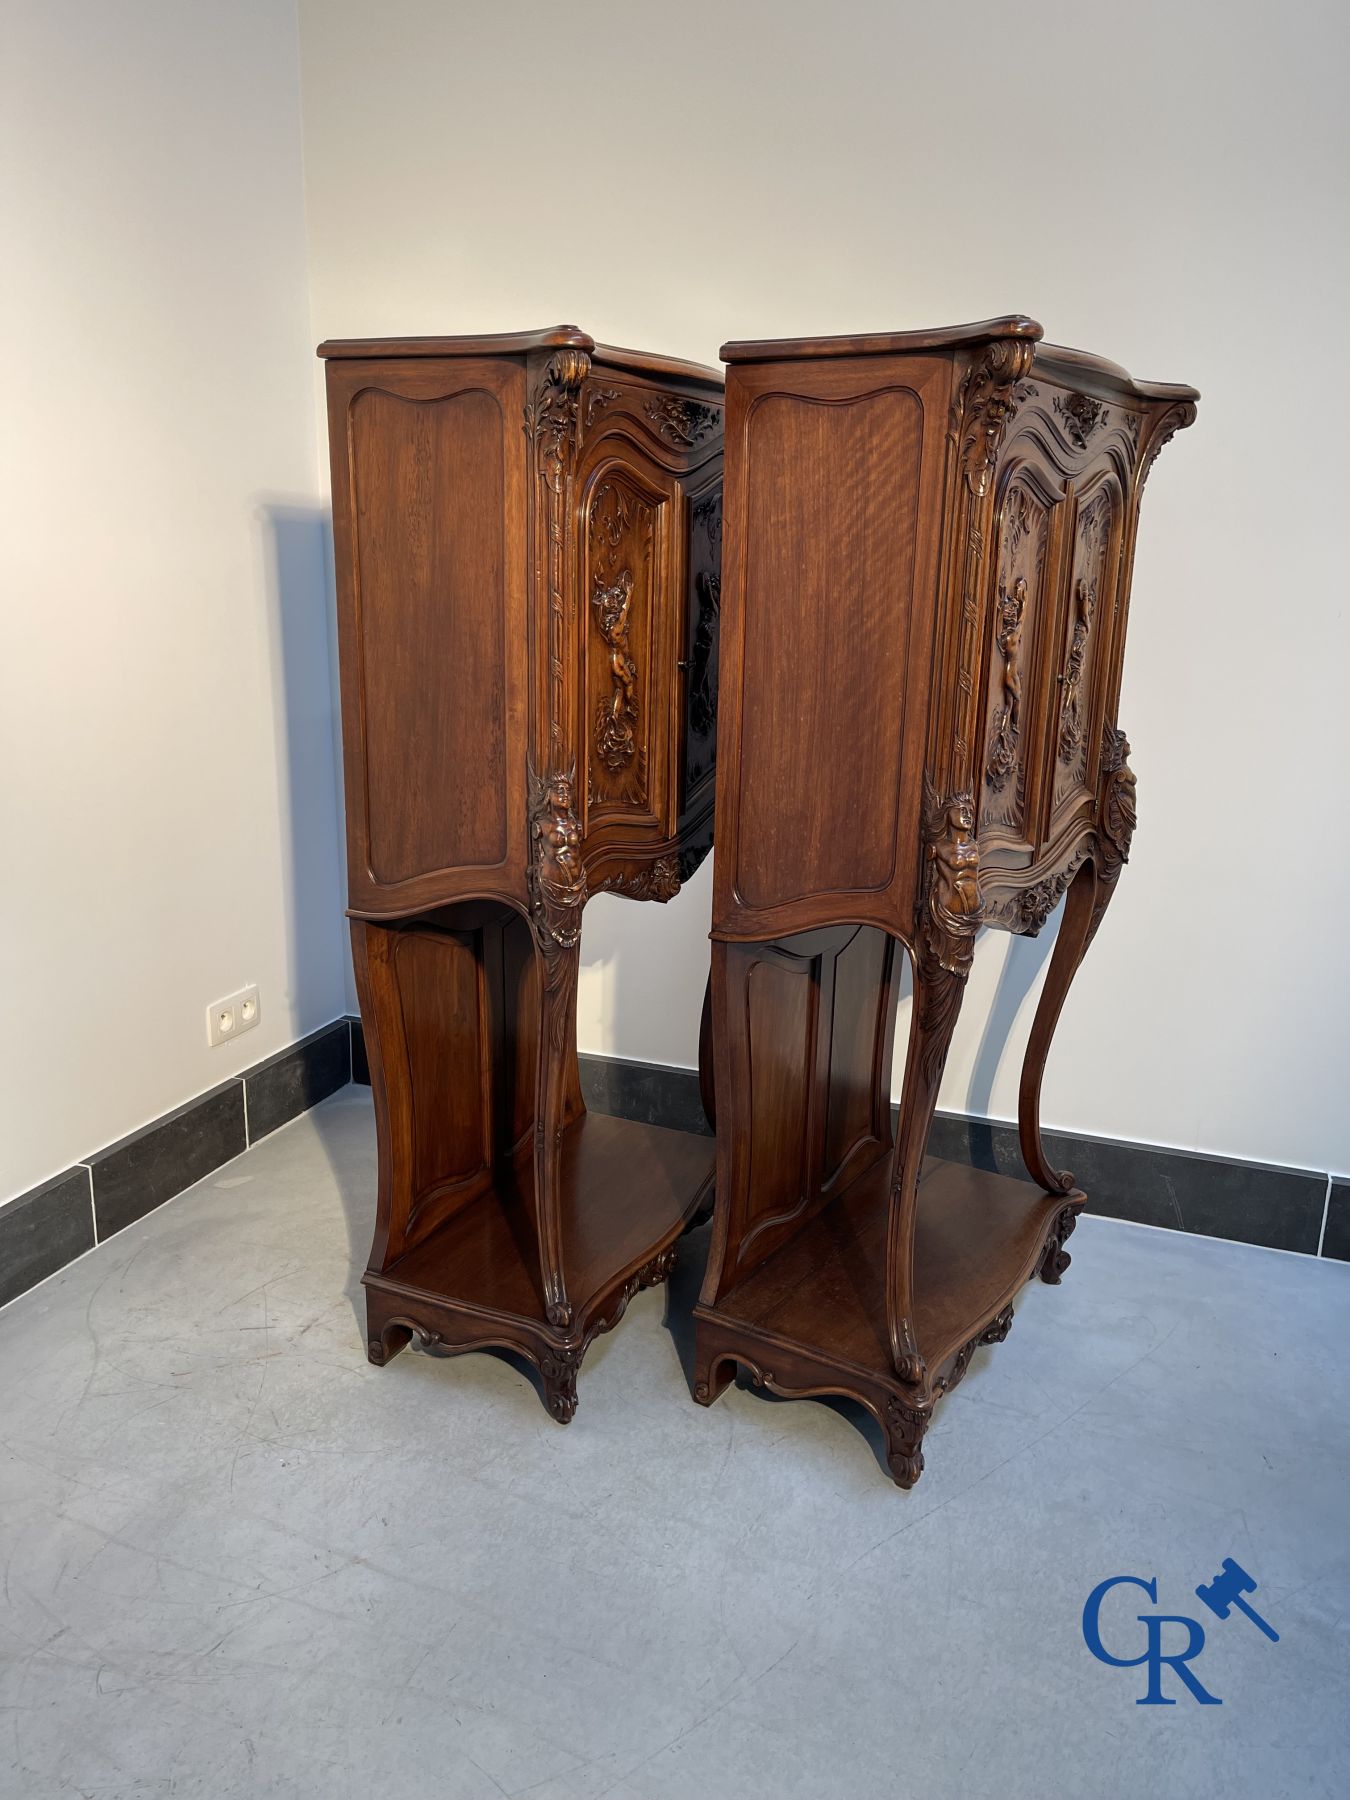 Furniture: A pair of finely carved furniture. LXV style. - Image 12 of 15